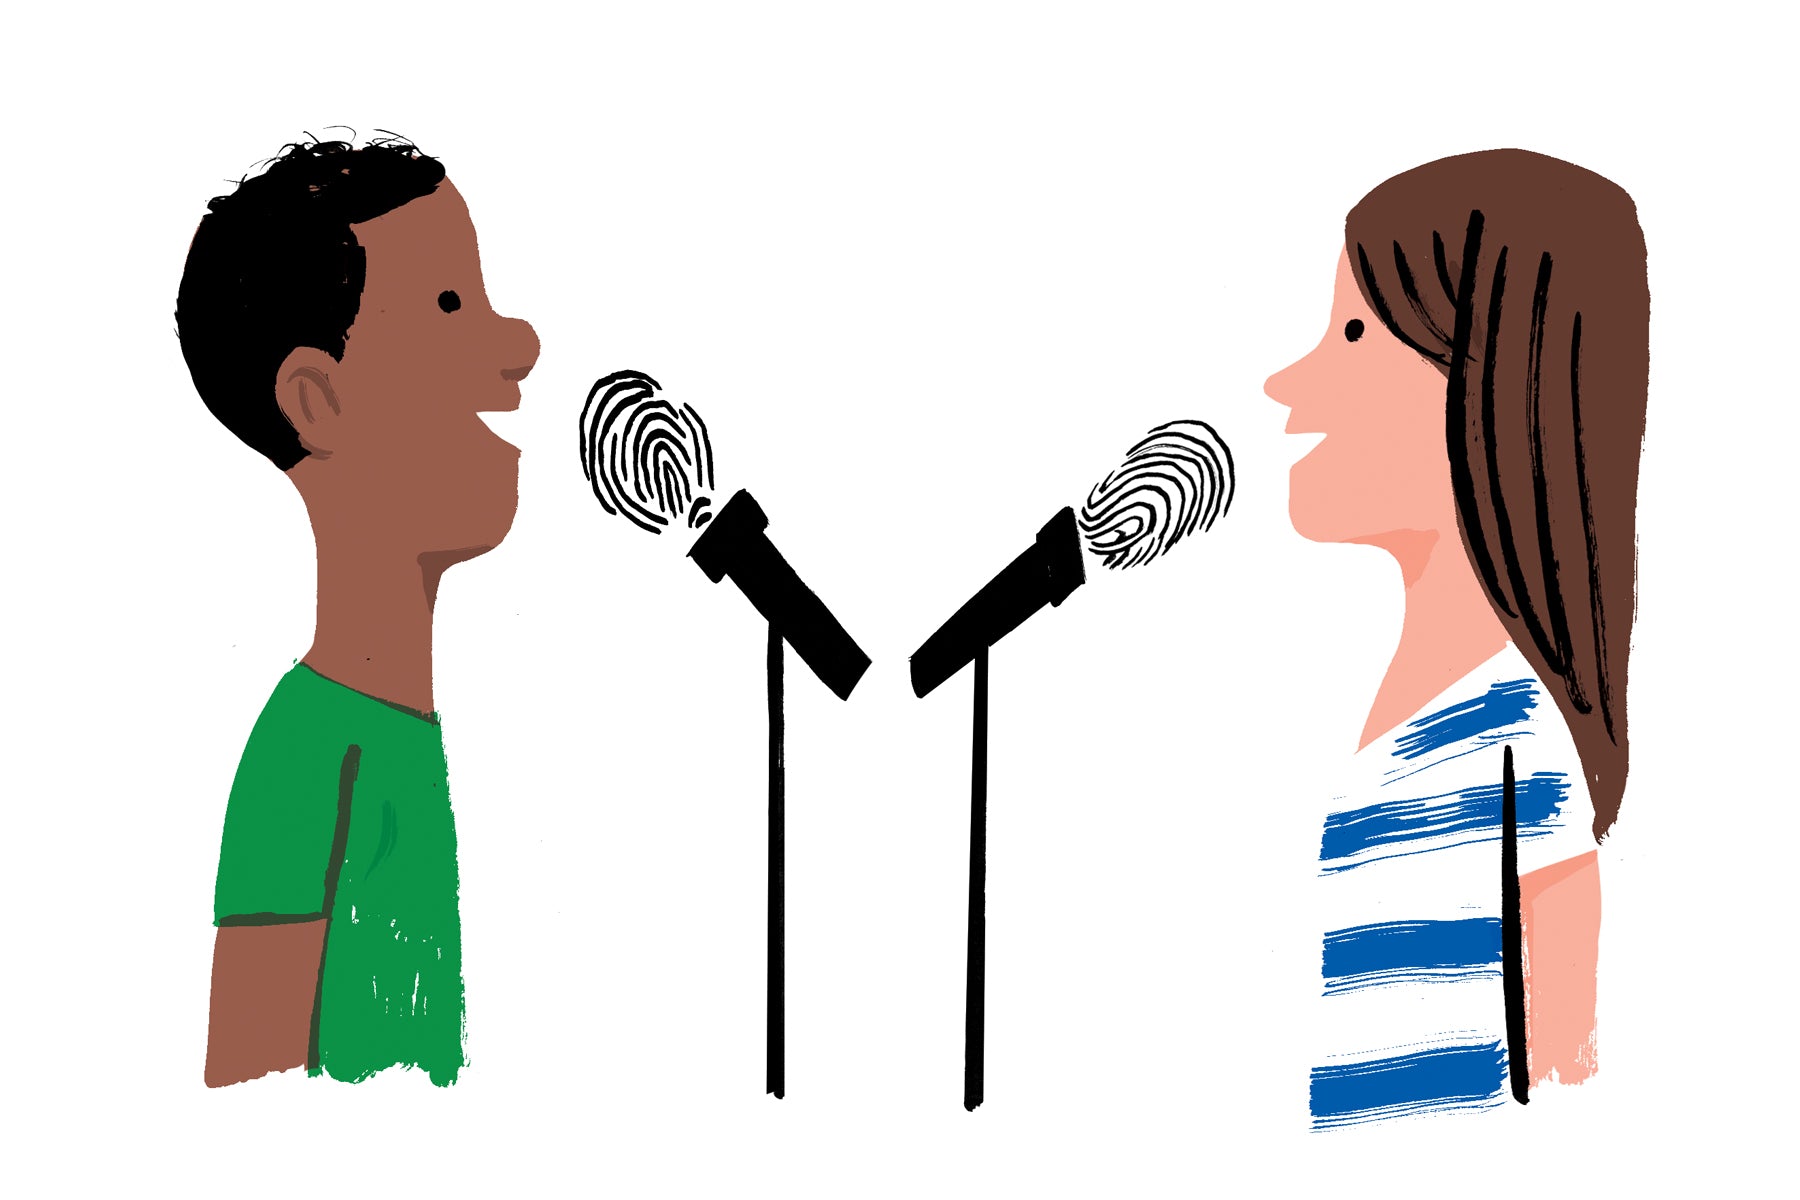 Illustration of two children, a black boy and a caucasian girl,  speaking into a microphone but the microphone is a fingerprint. This is a metaphor for their individuality as they are introducing themselves. 